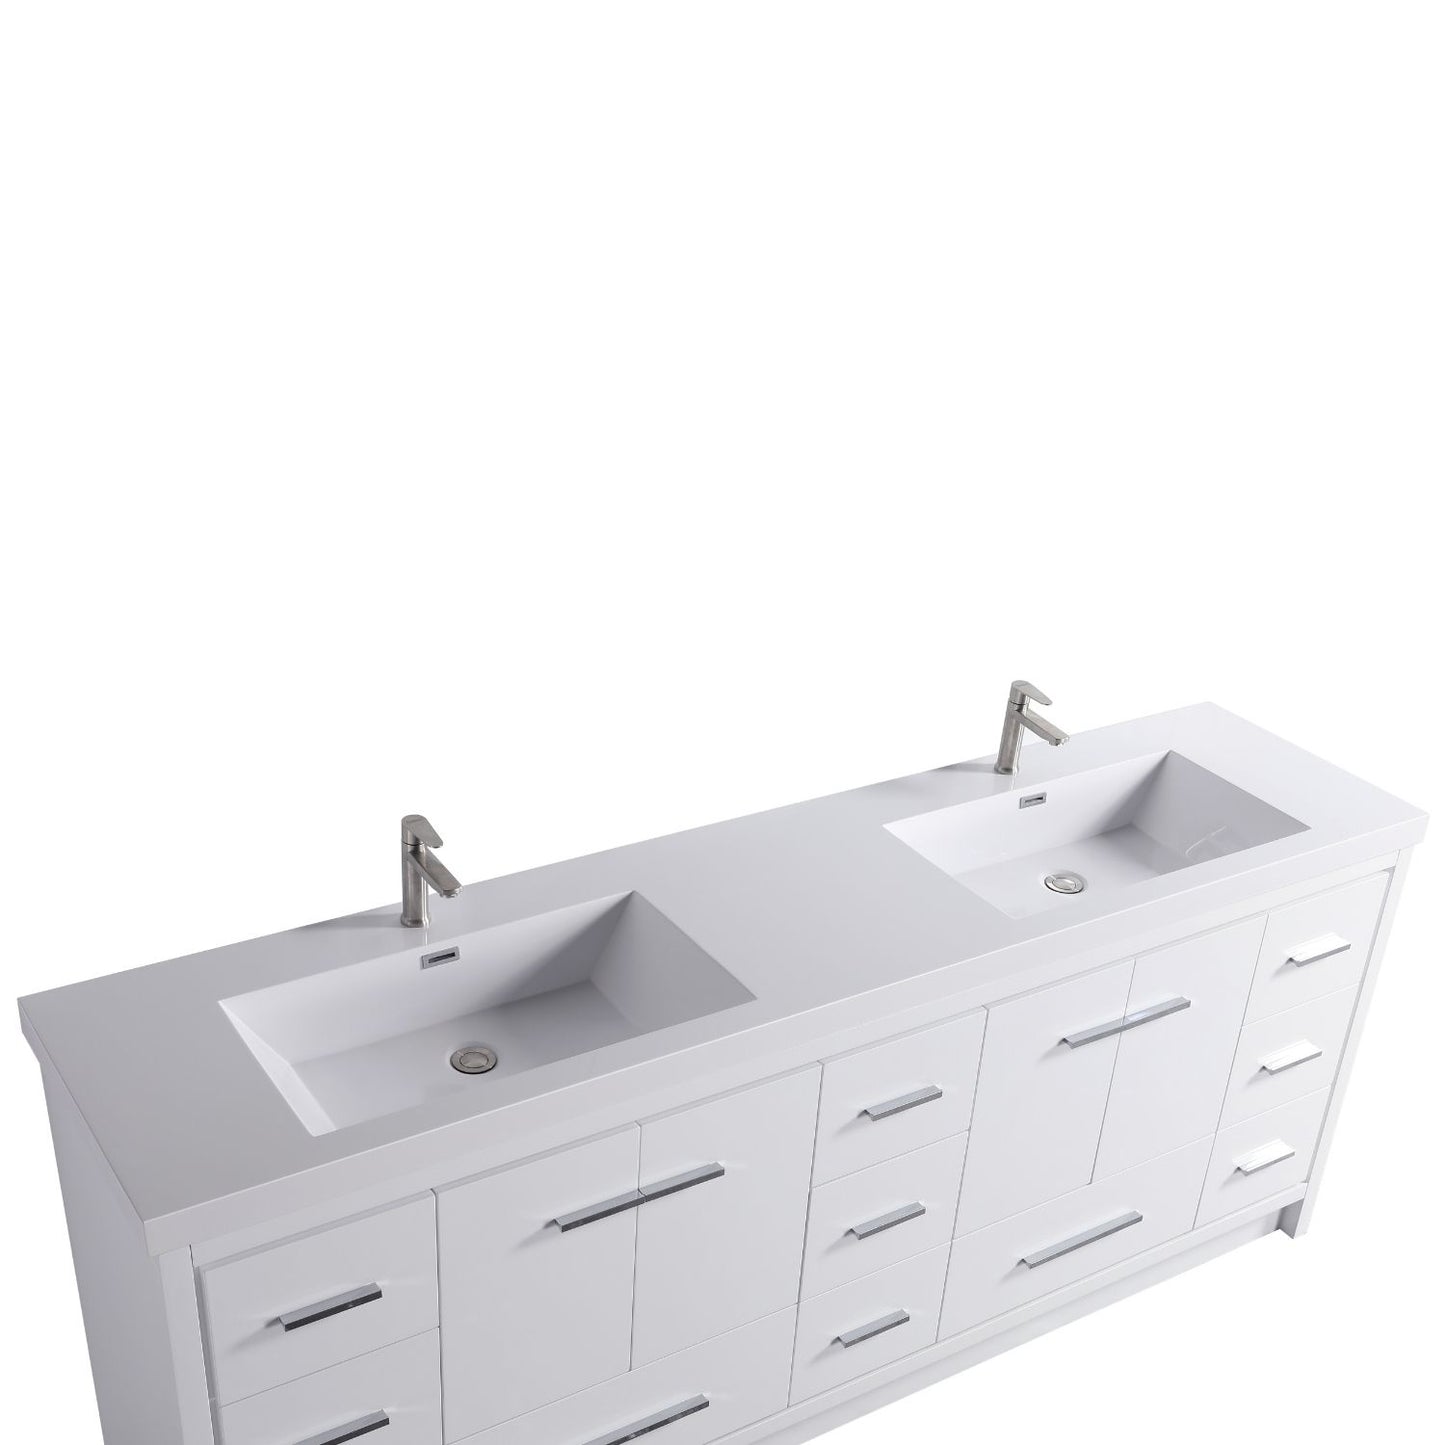 Waterpar® 83.9 in. L x 19.7 in. W x 35 in. H Bathroom Cabinet with Dual Resin Sink